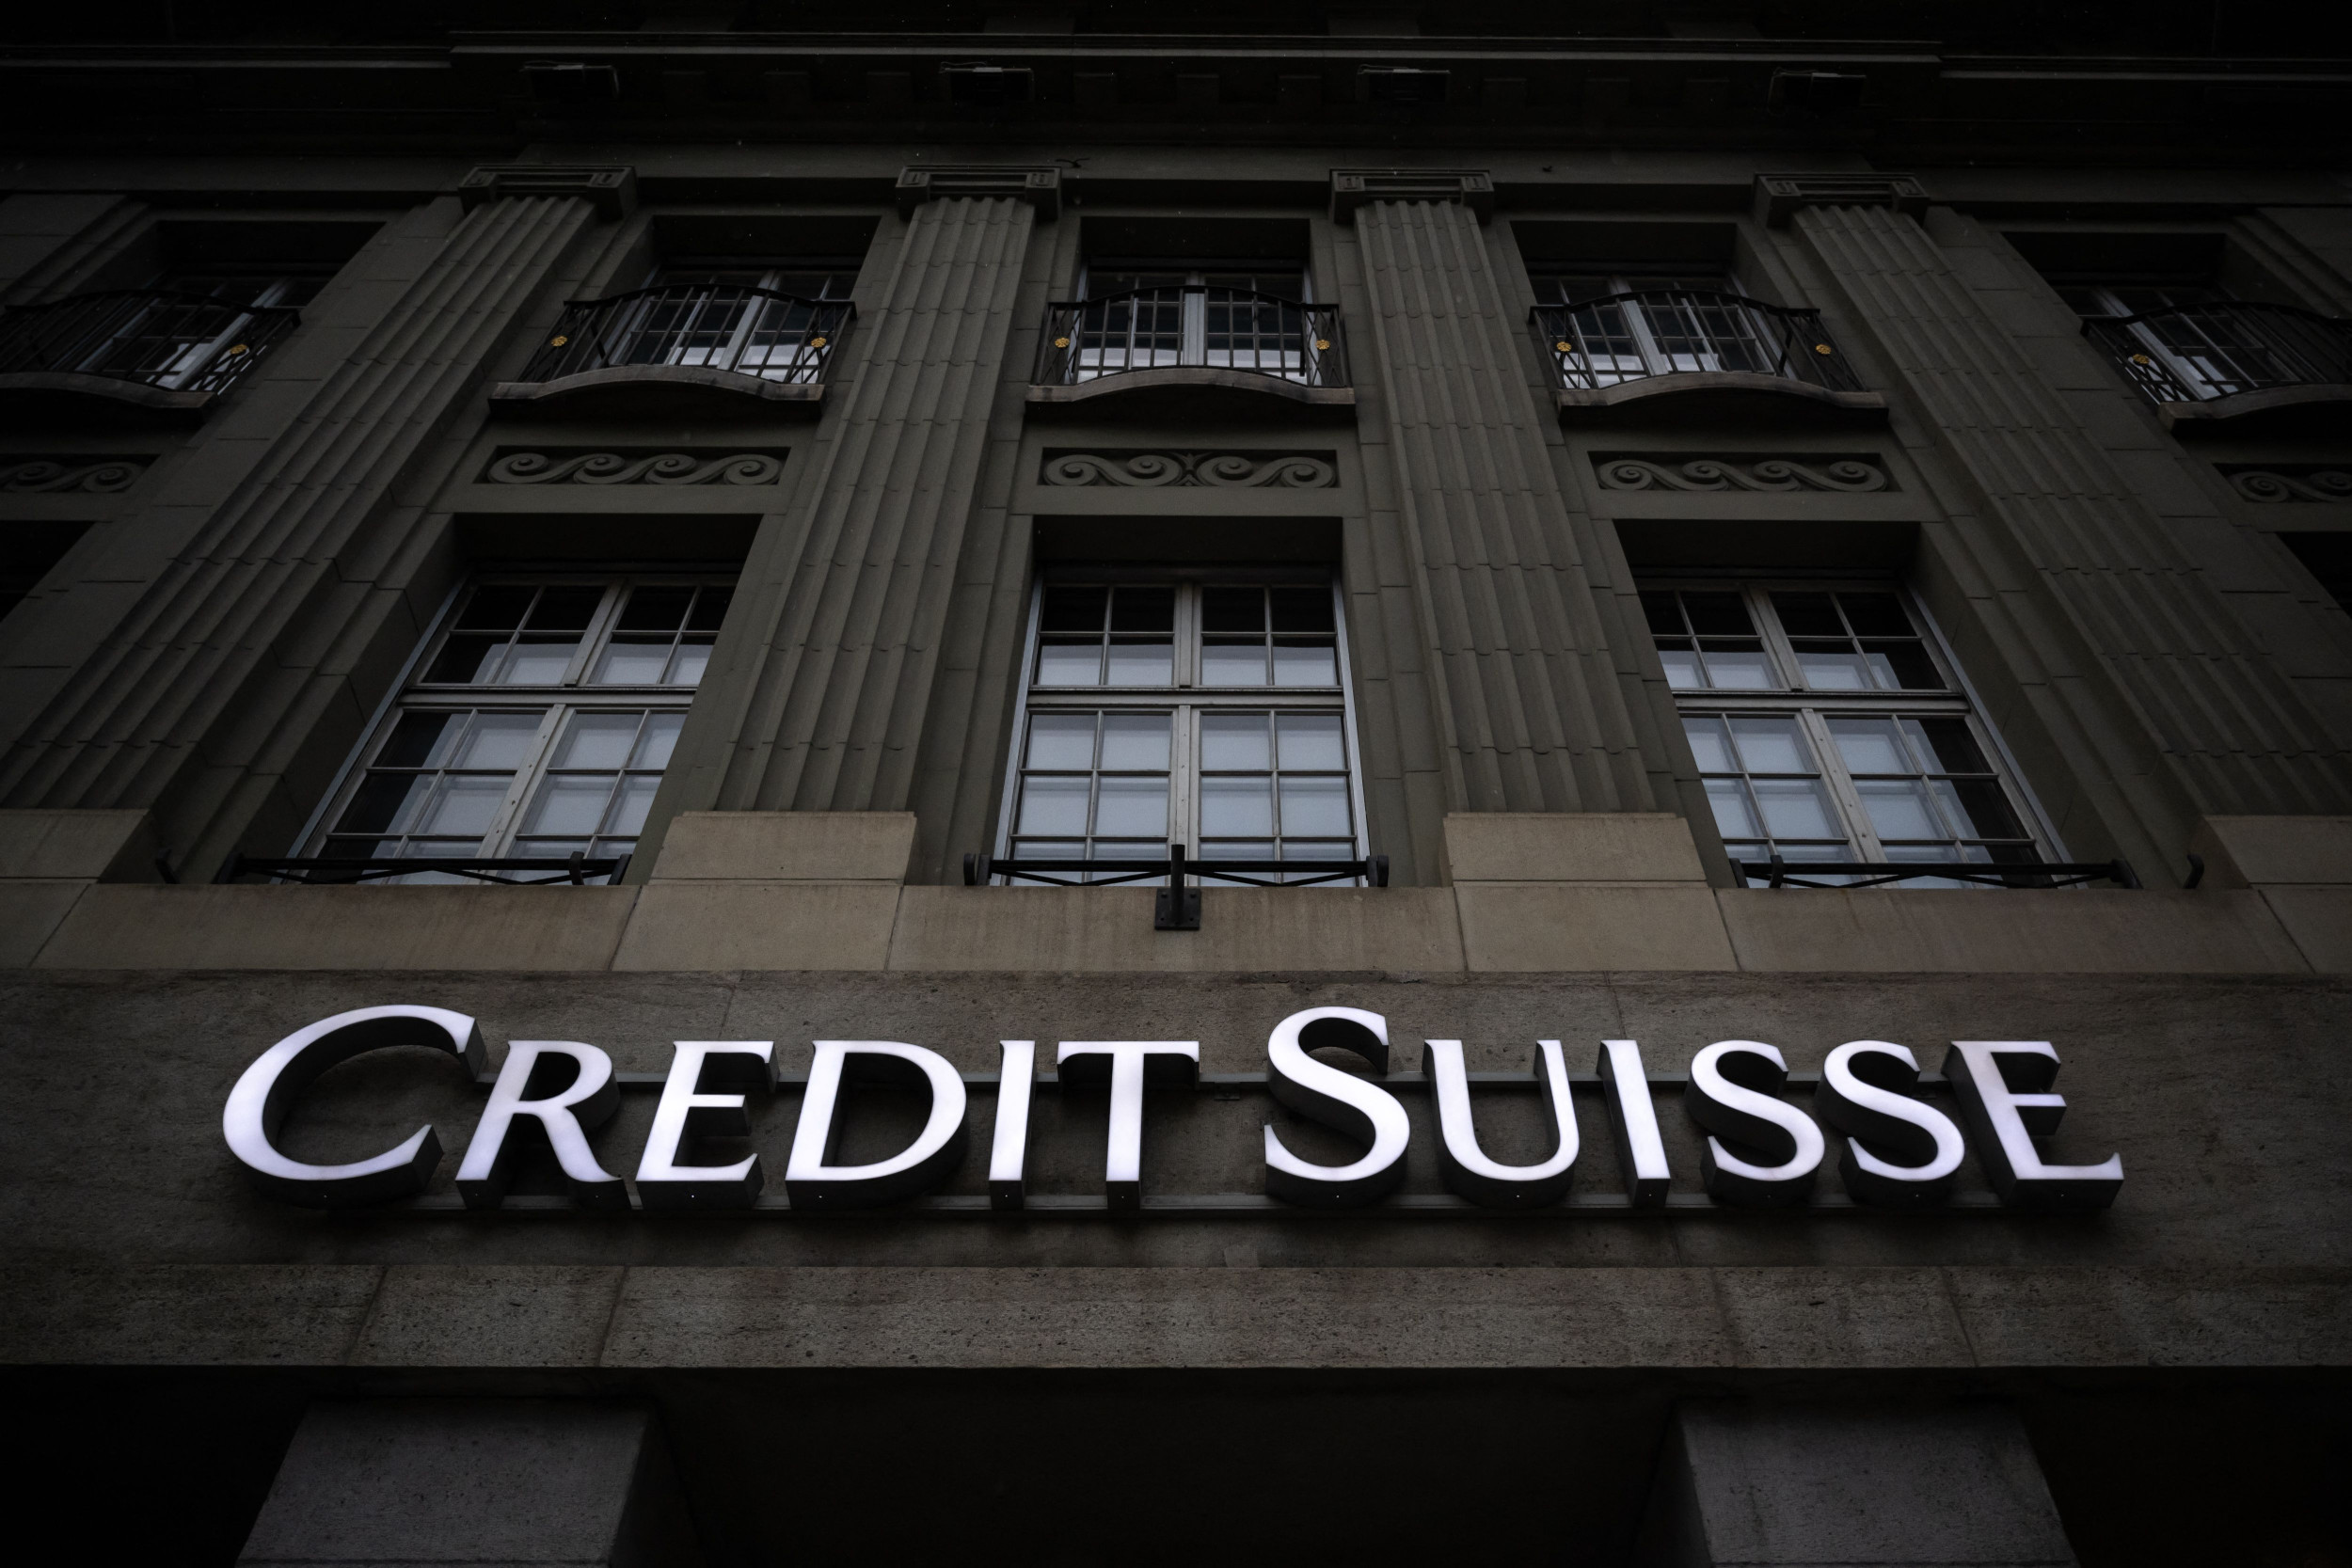 credit suisse rescued after turbulent week